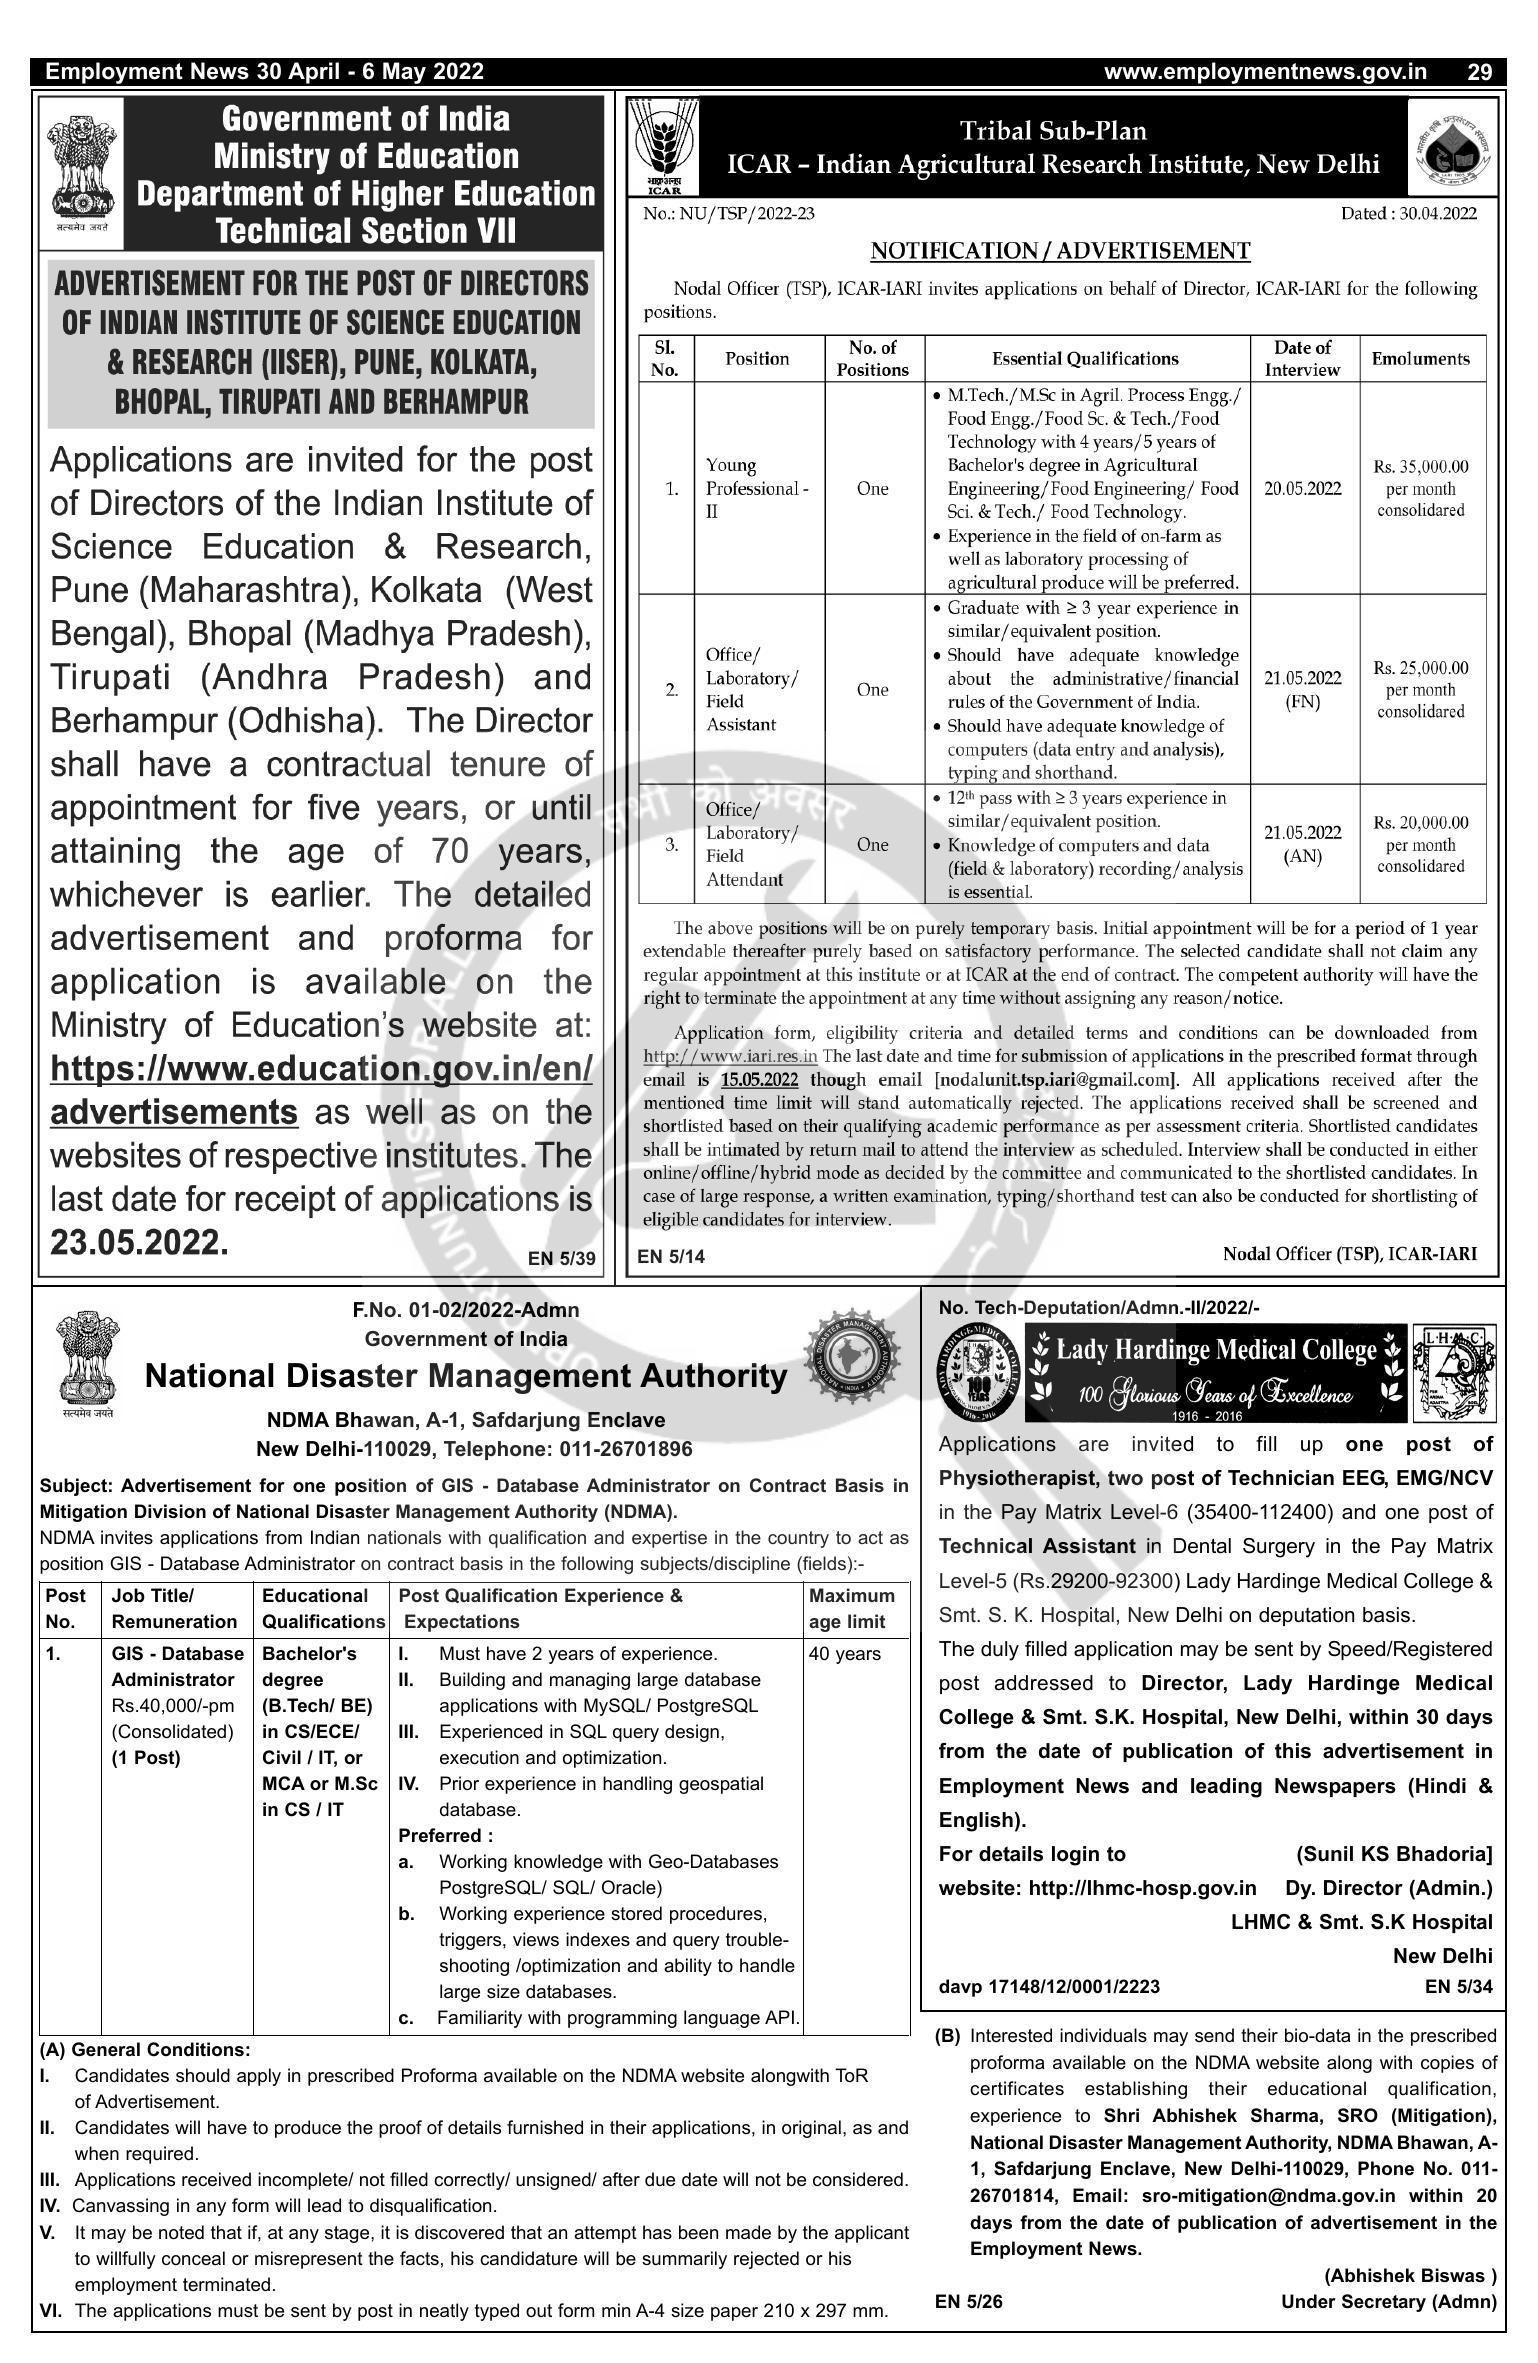 Lady Hardinge Medical College Physiotherapist, Technician Recruitment 2022 - Page 1